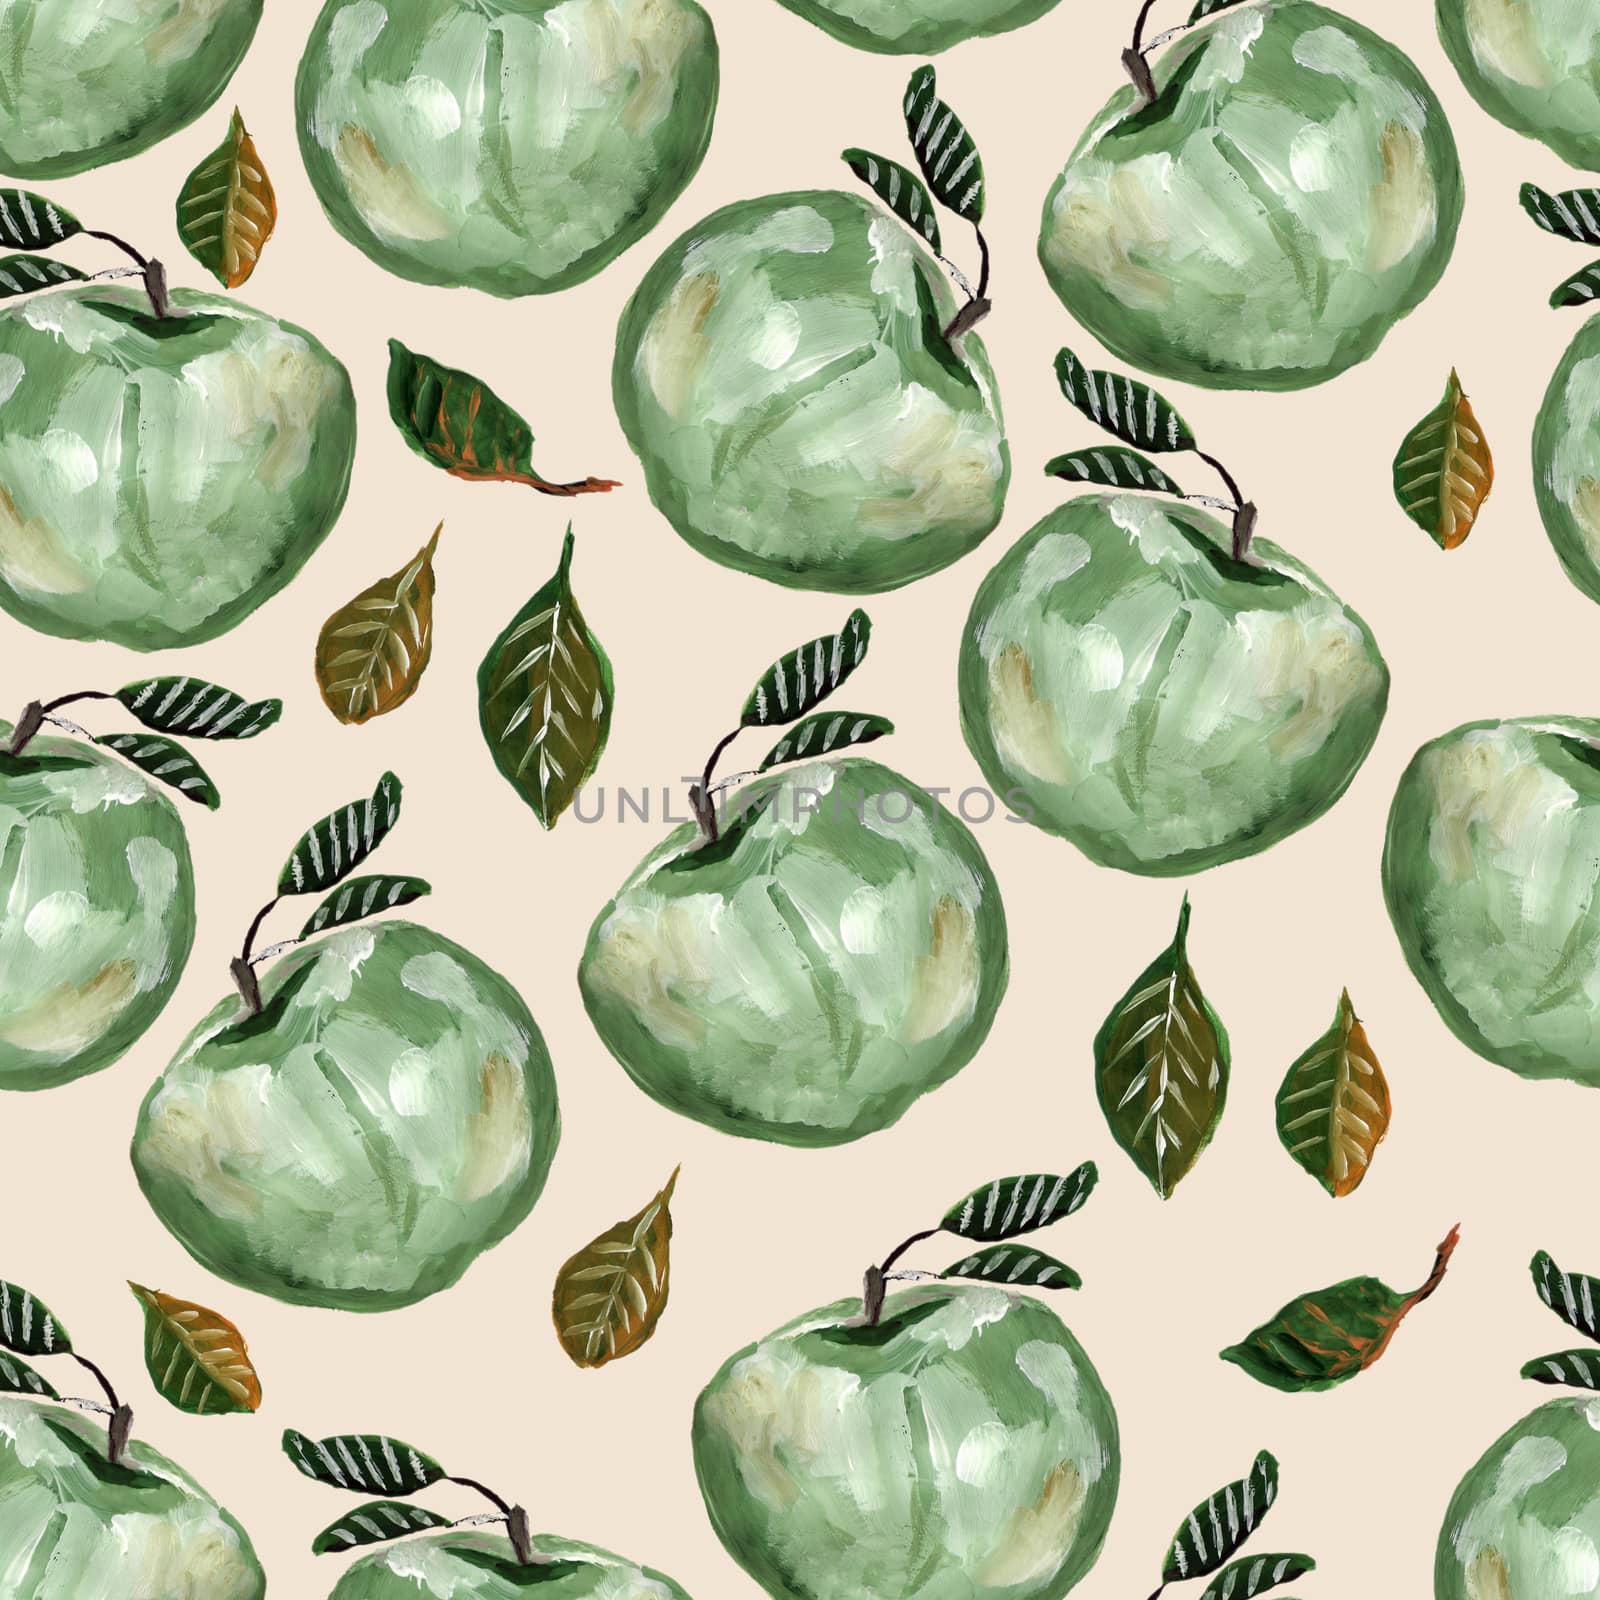 Seamless pattern with green apples. Repeated apple and leaves fruit background for design, fabric, print, textile, textile, wallpaper, posters.